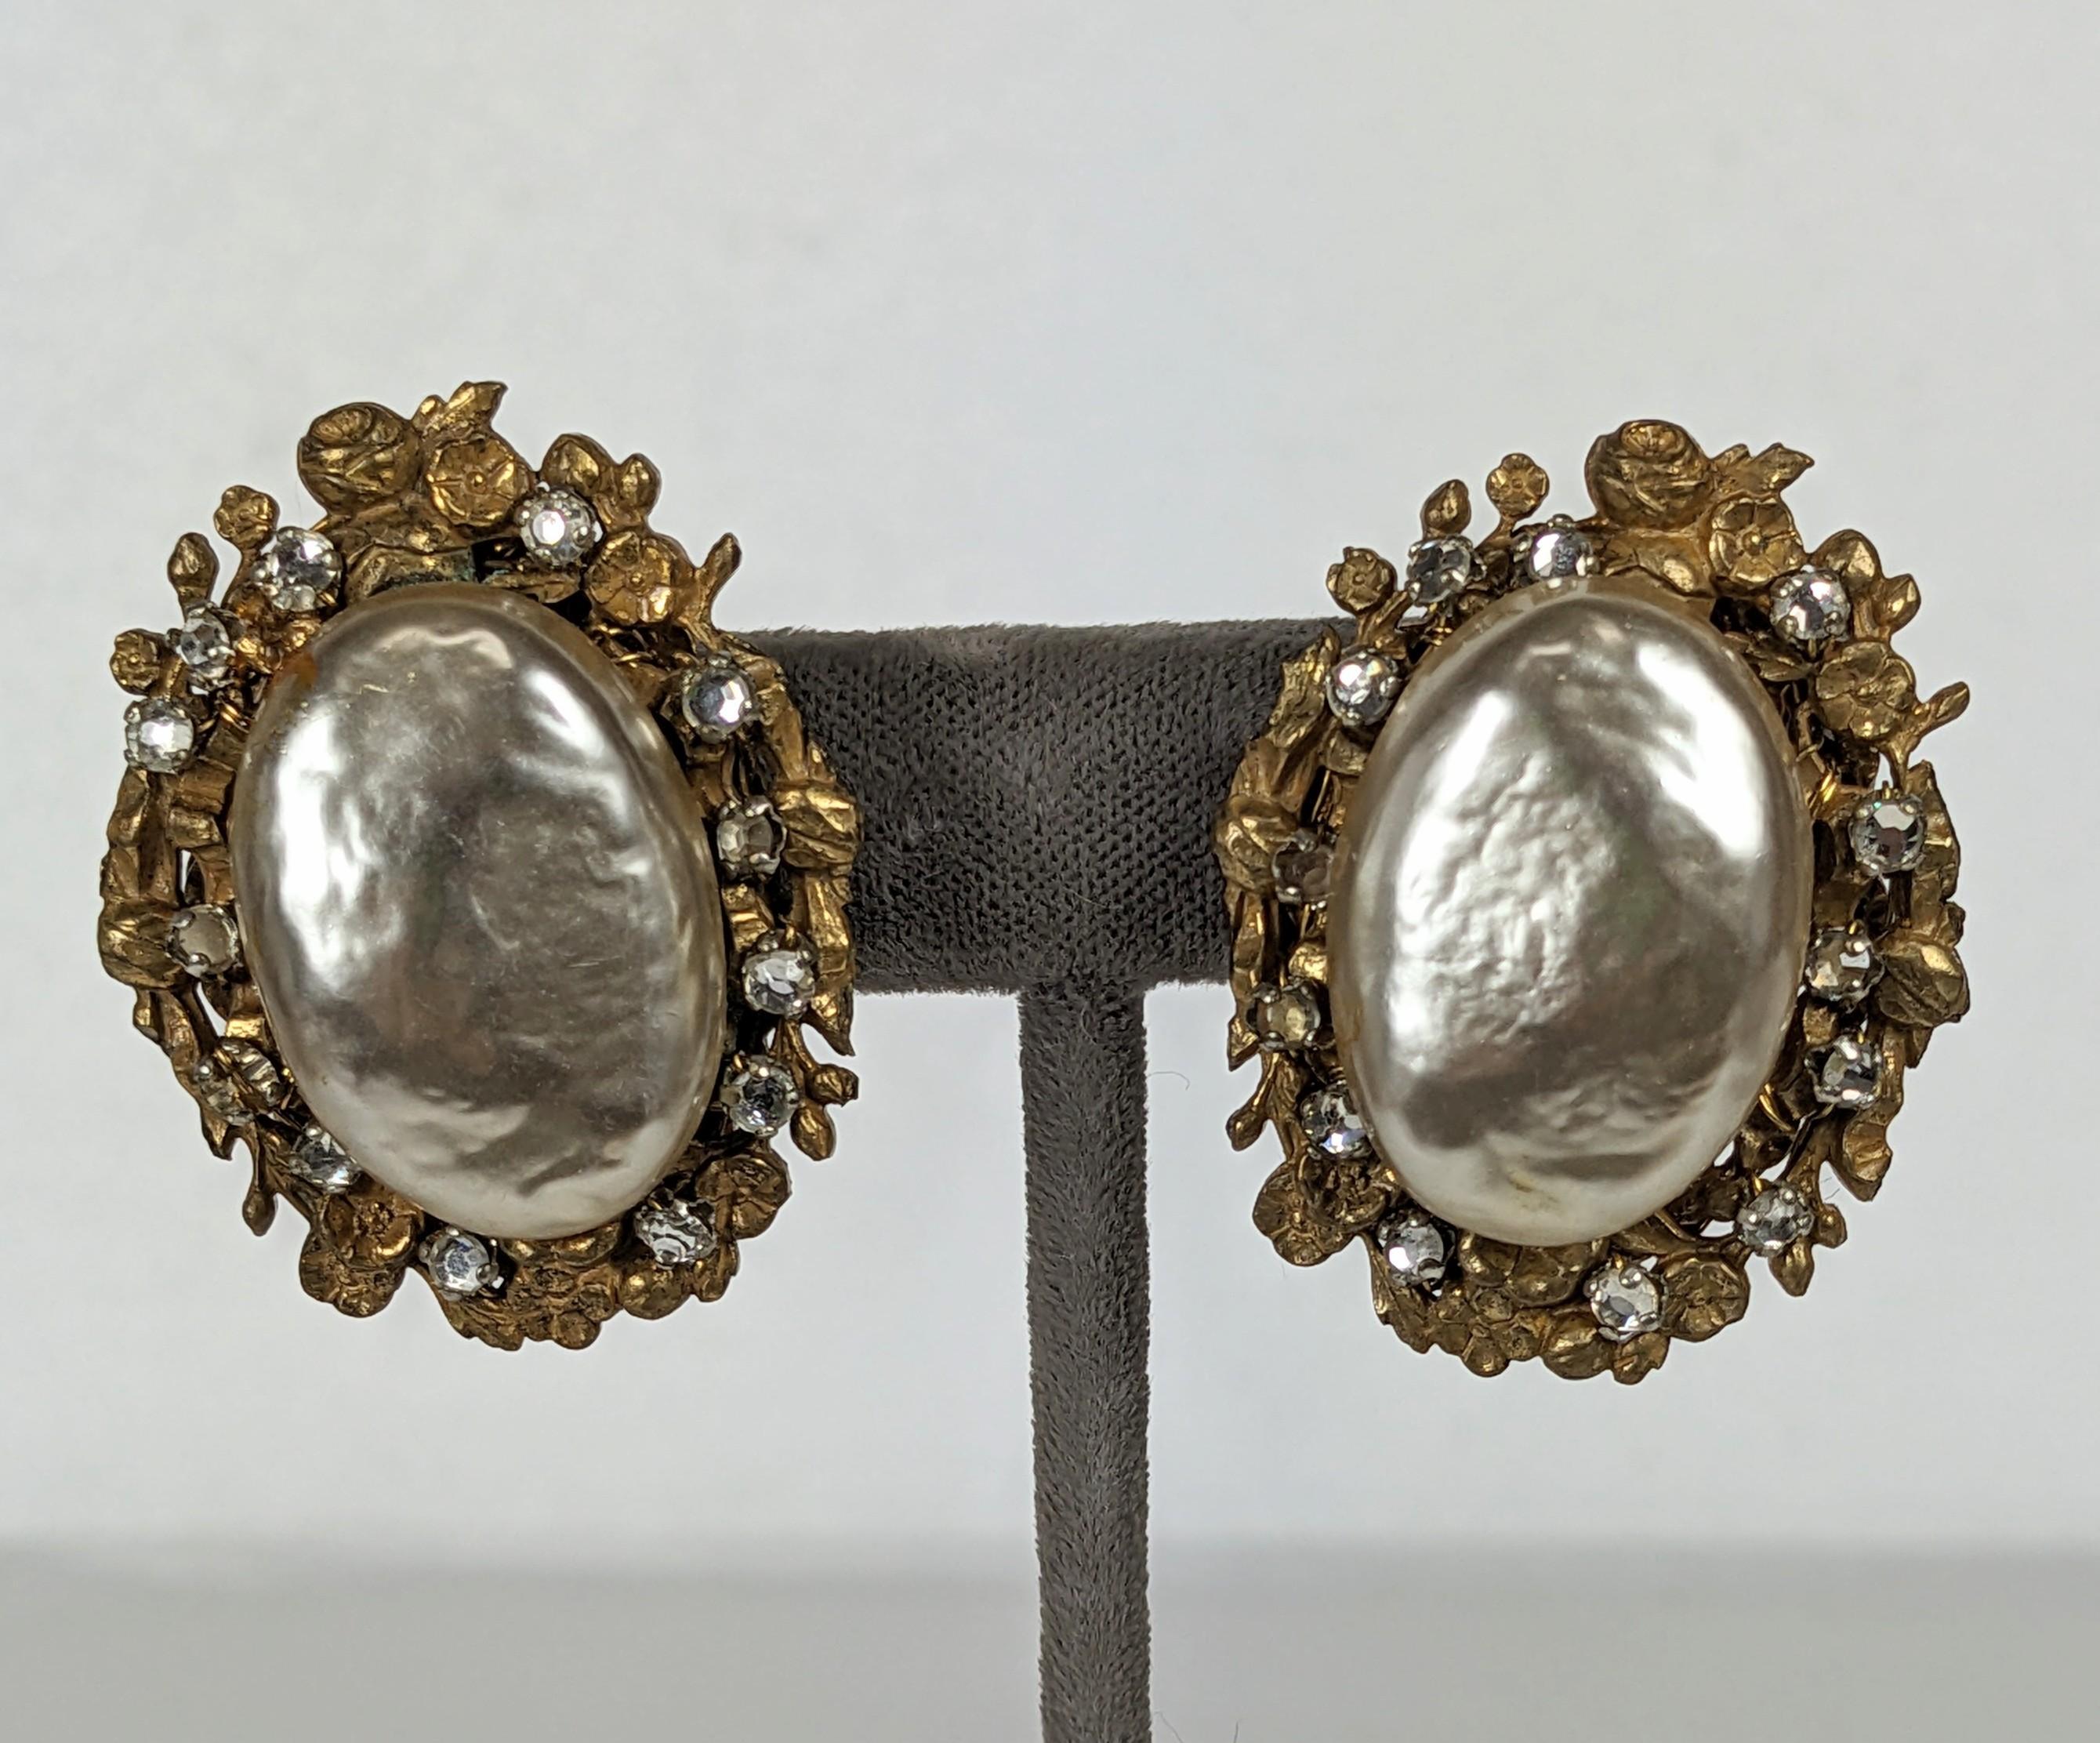 Dramatic Miriam Haskell Large Faux Pearl and Crystal Earrings from the 1950's. Large faux baroque pearls set in Russian gilt floral filigree with hand sewn rose montee crystals. Adjustable clip fitting. 1.5